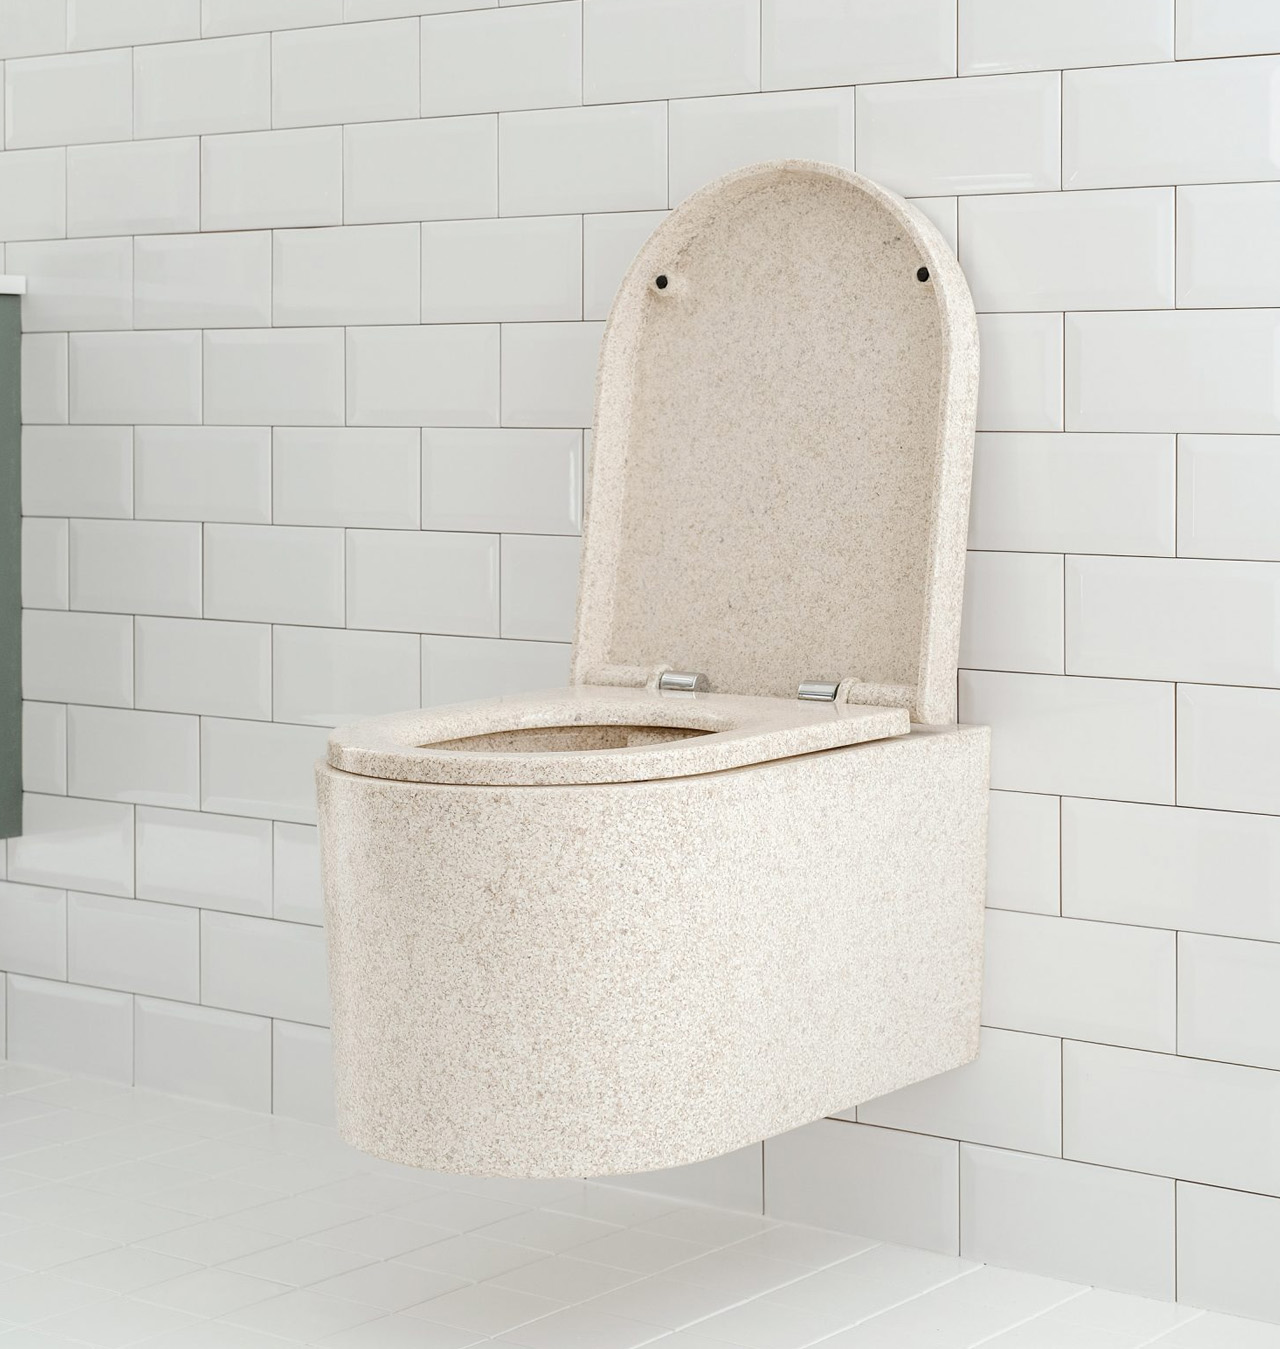 Meet Block, the “world’s first” flush toilet built from wood chips